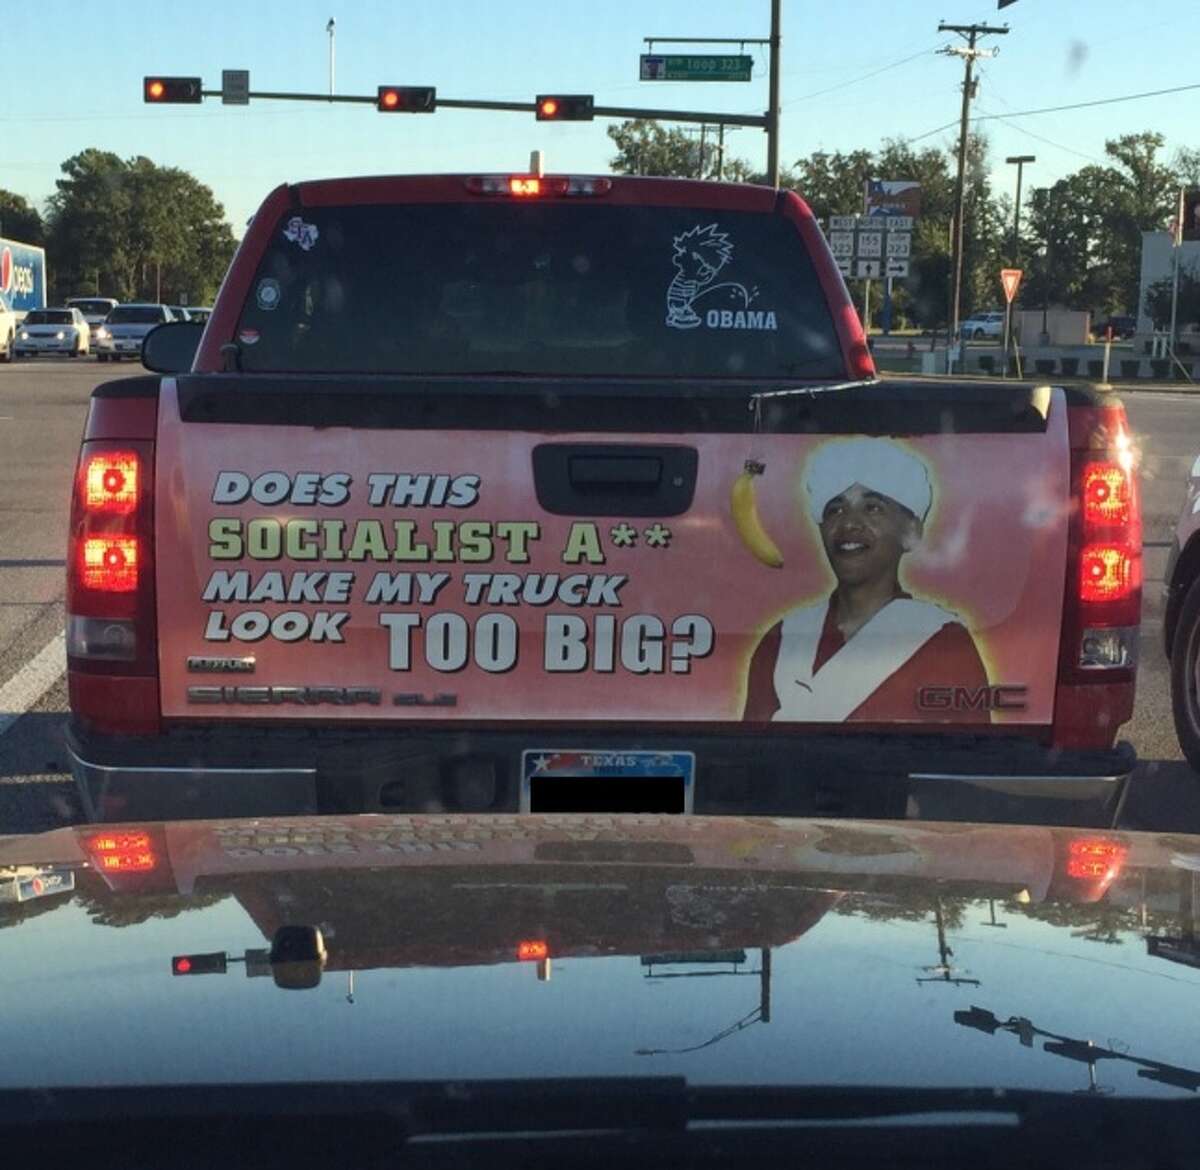 A photo of a truck with Texas tags that features on the tailgate one the most racist decals, complete with a real (and fresh) banana, that targets President Barack Obama was posted to Reddit on Thursday.